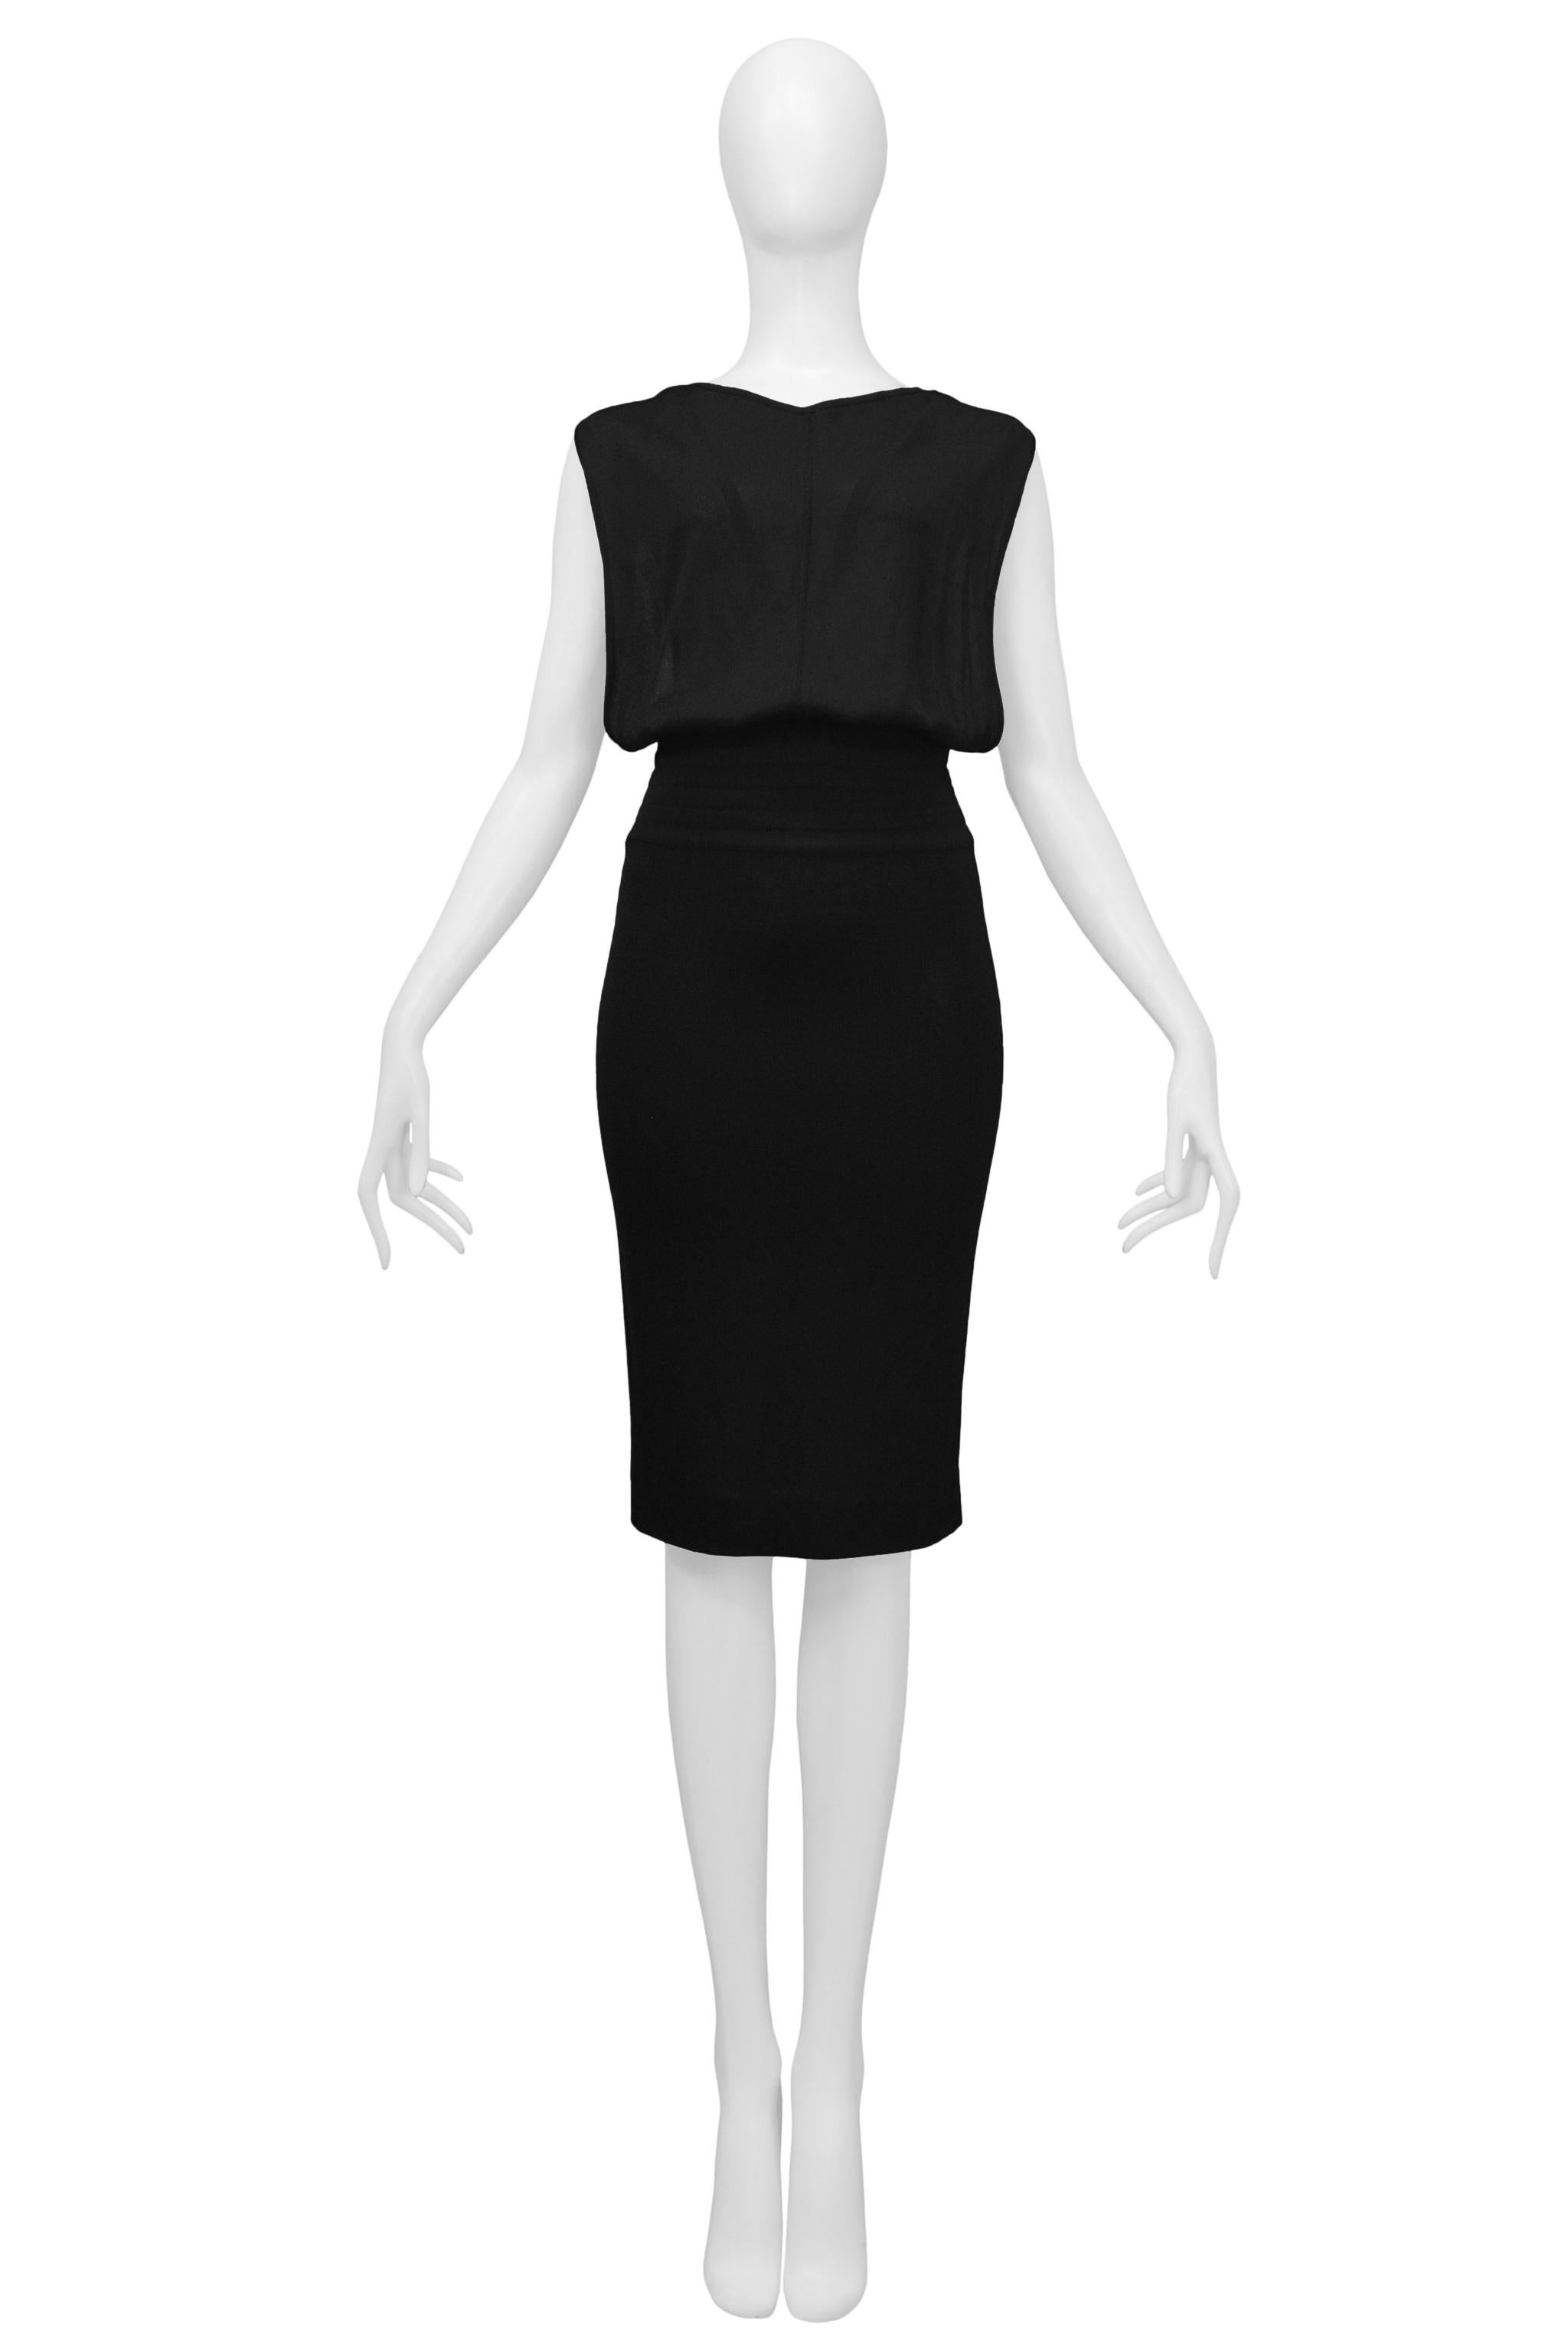 Resurrection Vintage is excited to offer a vintage Azzedine Alaia black wiggle dress featuring a blouson top with interior straps to keep the top in place, exposed back with V straps, multiband waistband, and fitted skirt with seaming. 

Azzedine